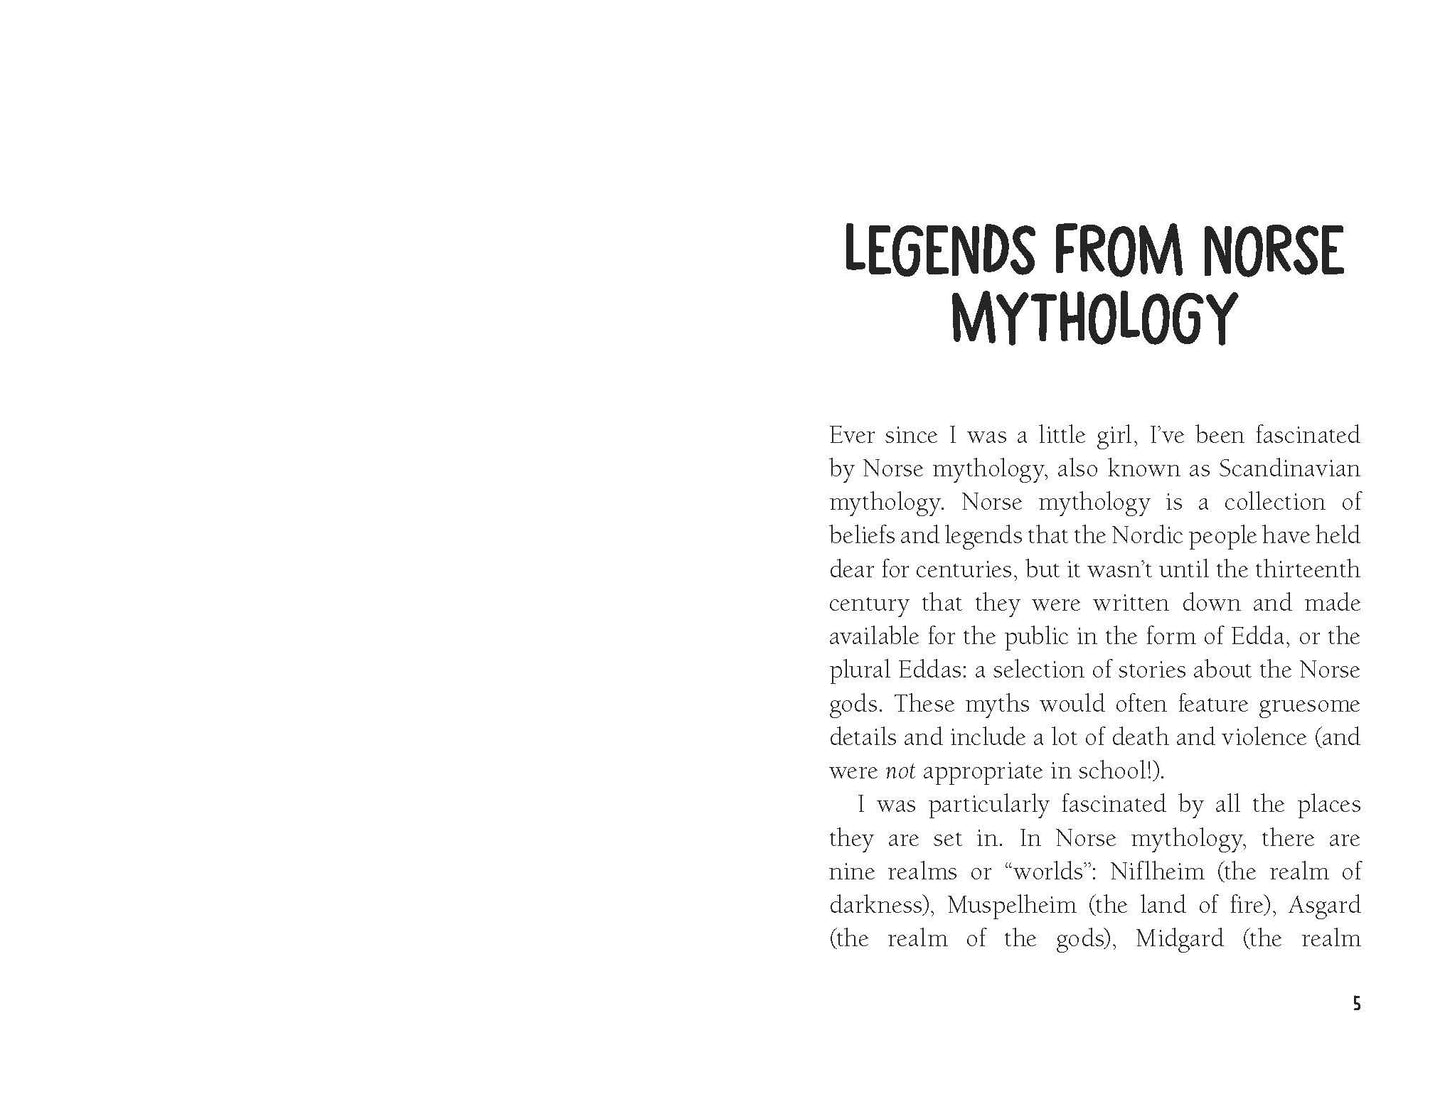 Norse Folktales Myths and Legends